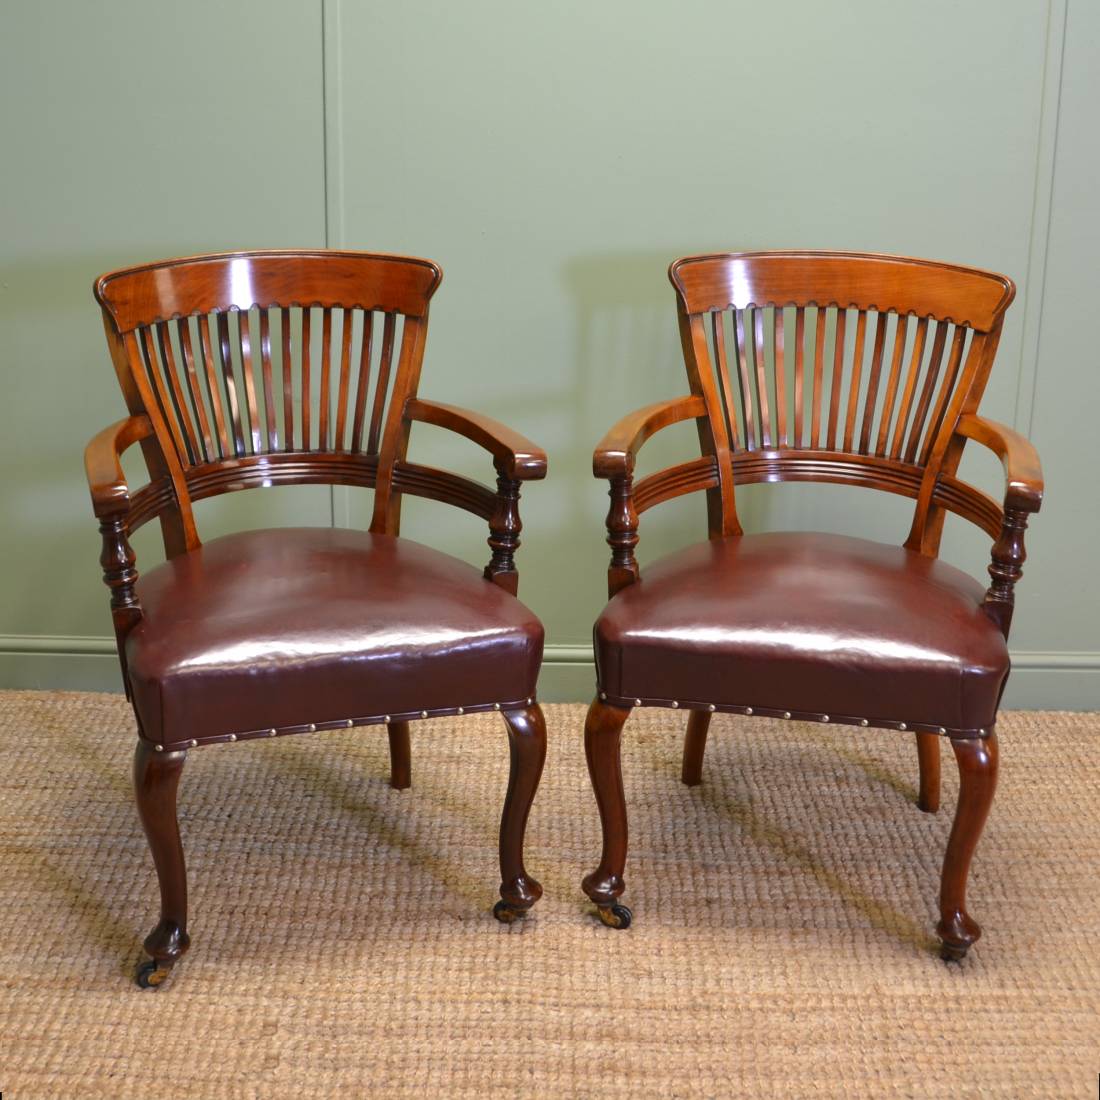 Fabulous Quality Victorian Solid Walnut Antique Pair Of Office Chairs by Lambs